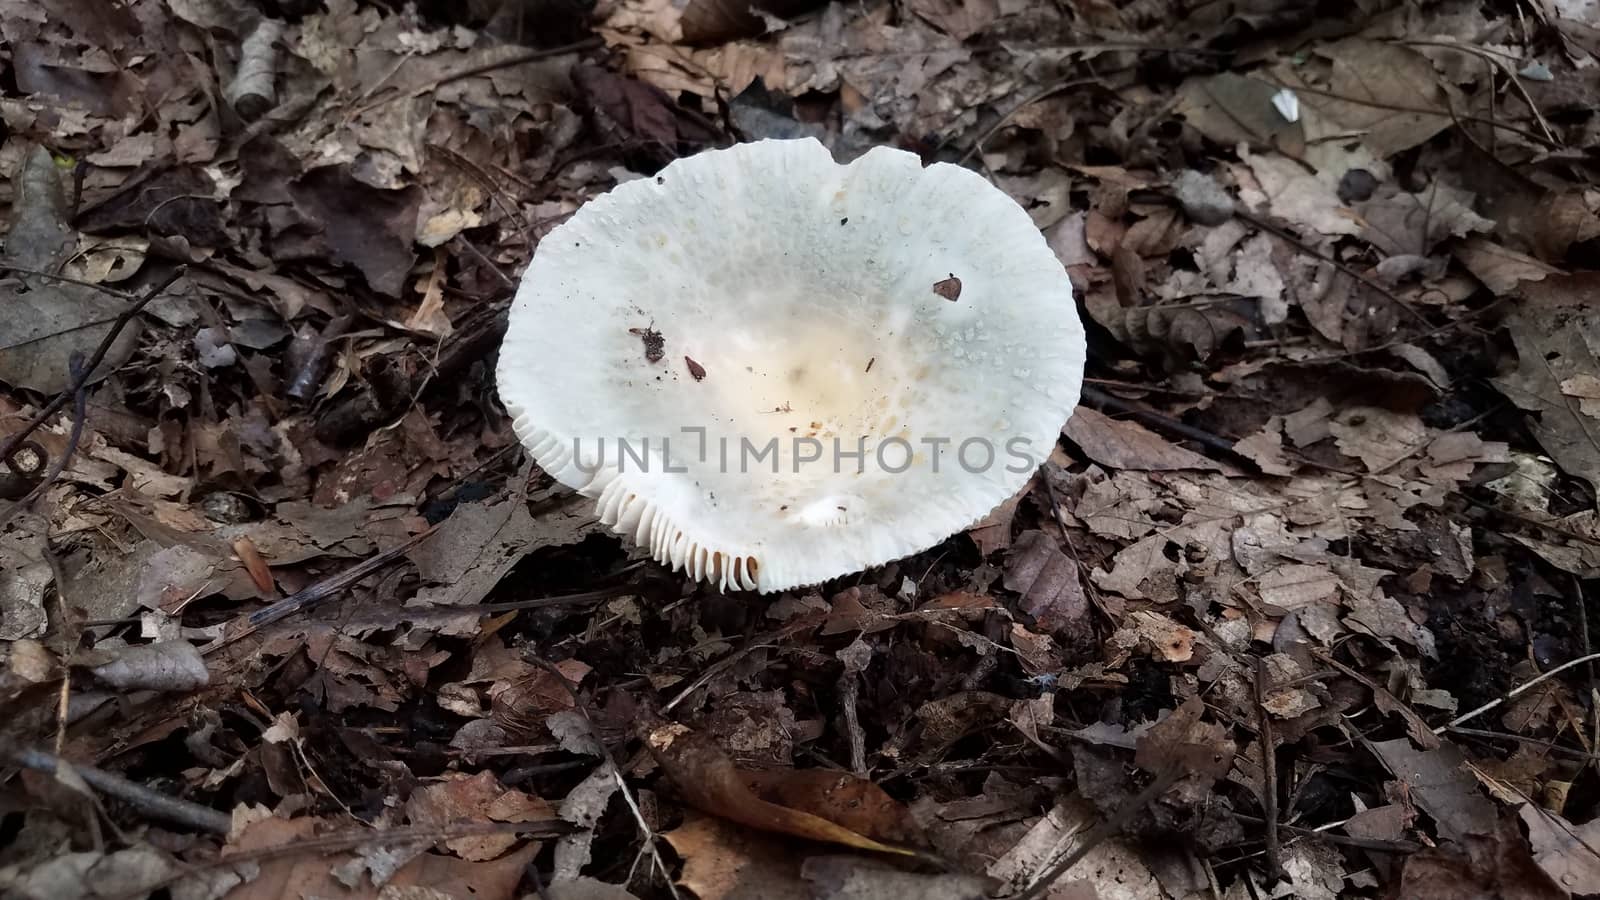 grey and white mushroom or fungus growing in brown leaves in forest or woods